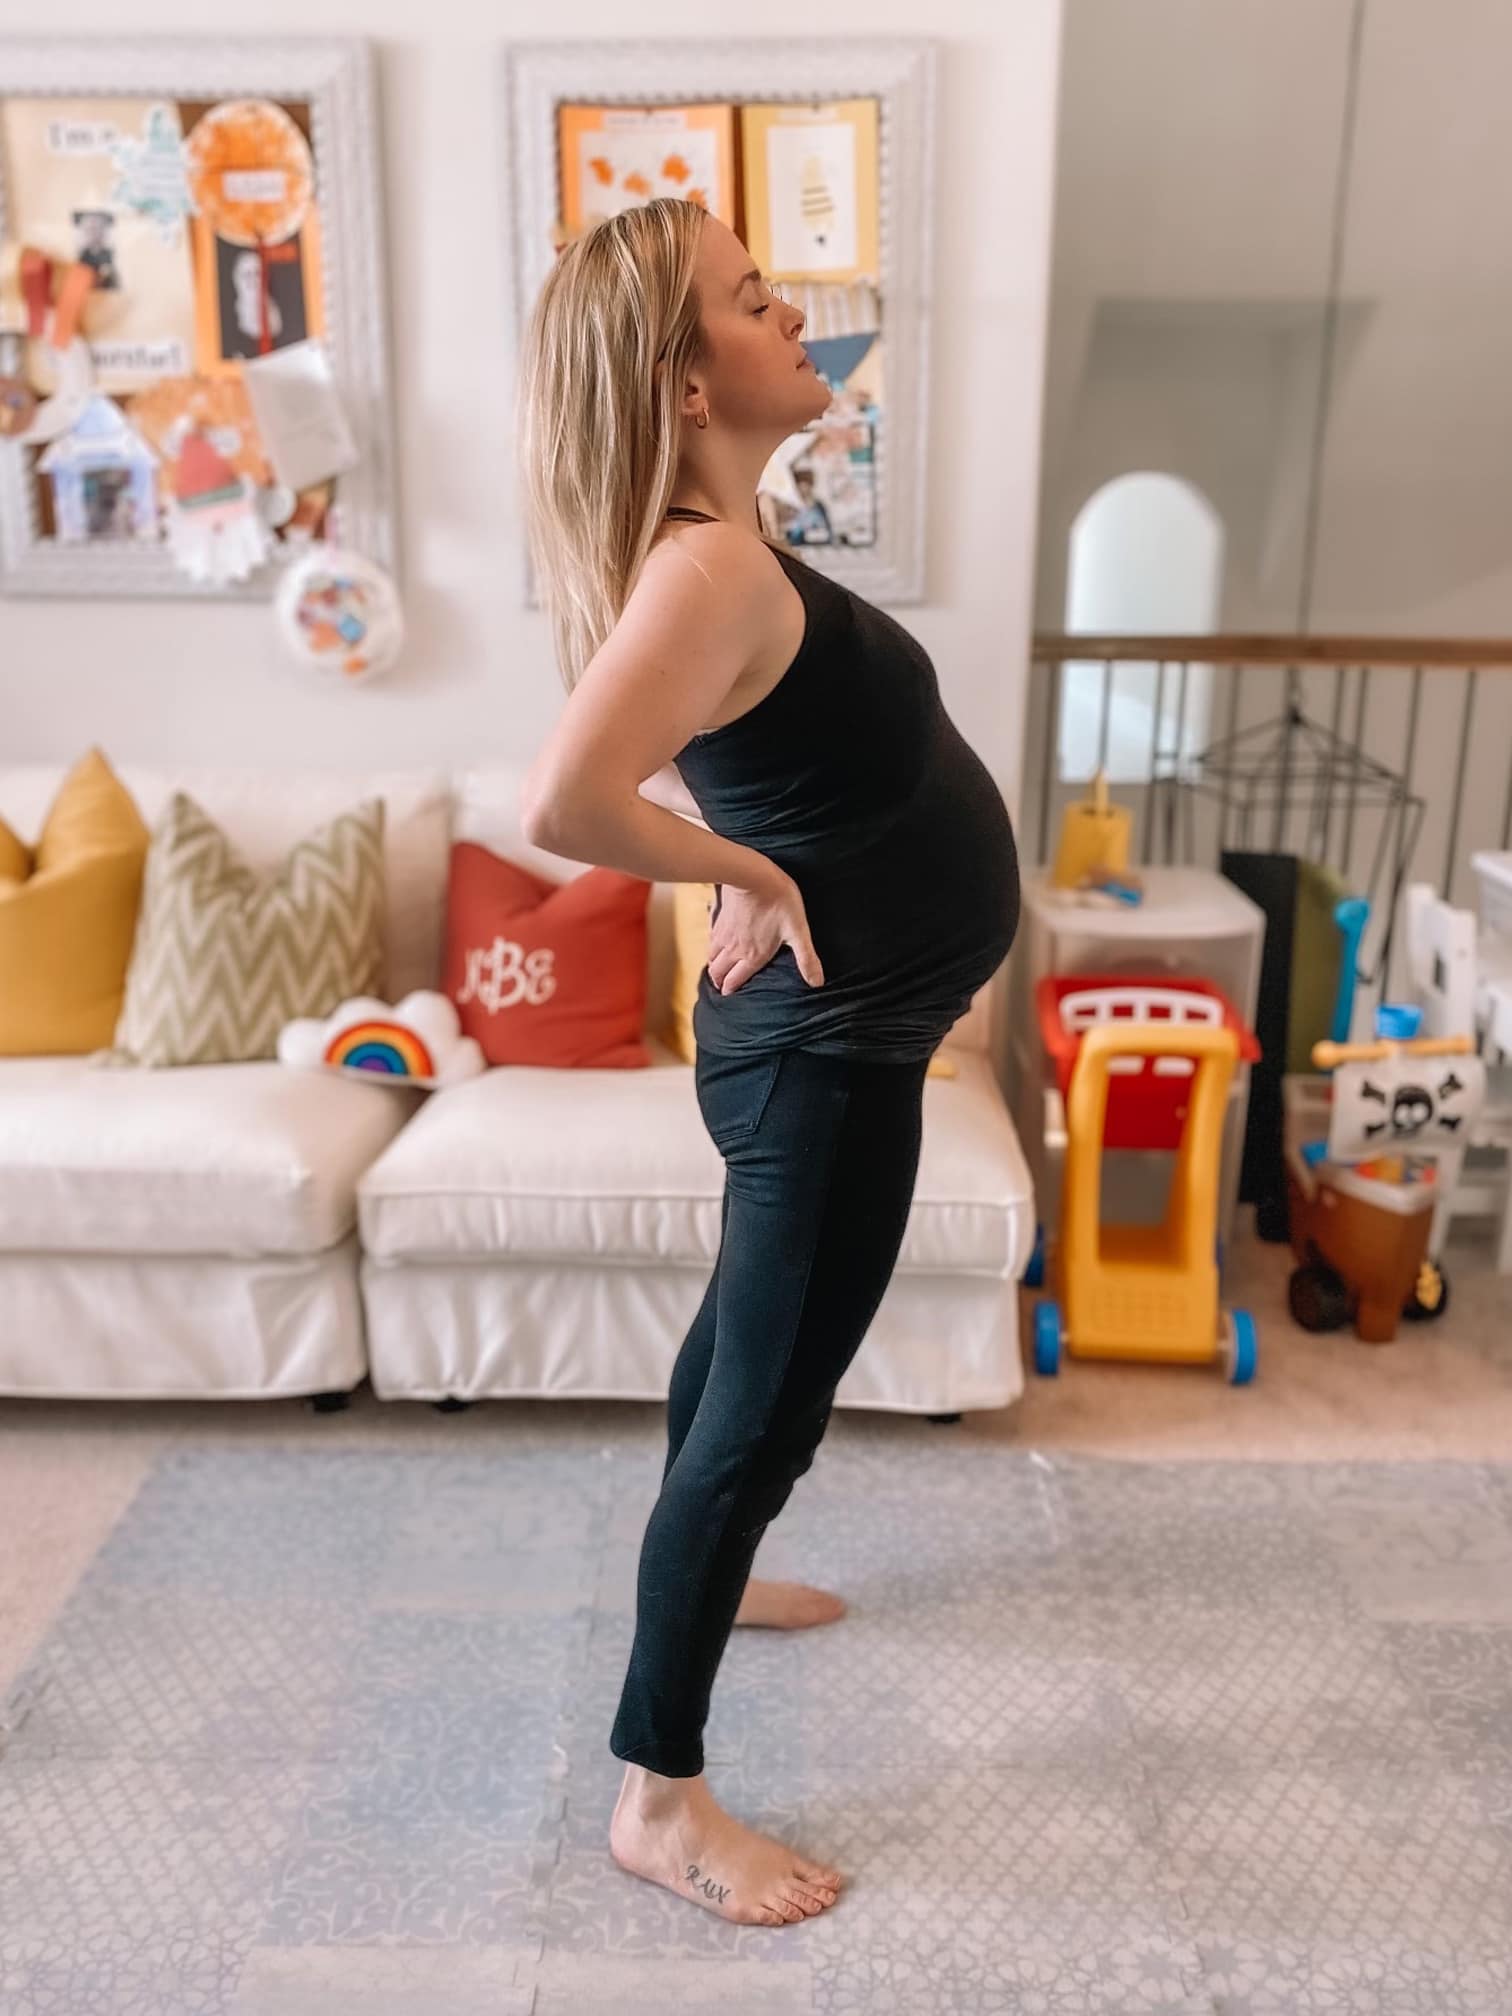 Pregnant woman doing a lower back stretch while standing.